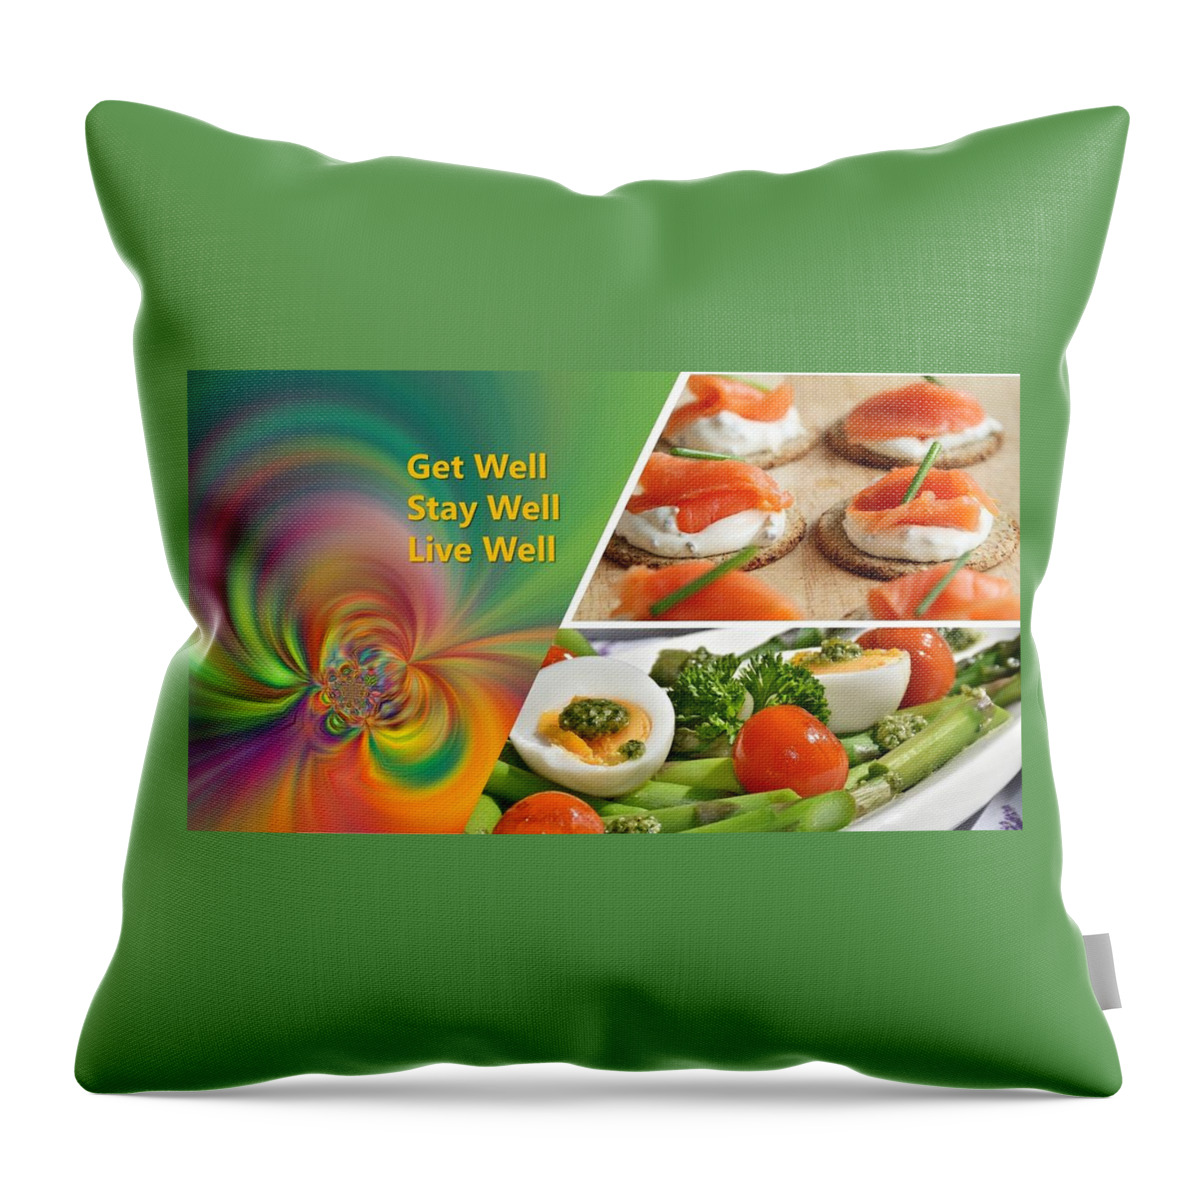 Get Well Throw Pillow featuring the photograph Get Well, Stay Well, Live Well by Nancy Ayanna Wyatt